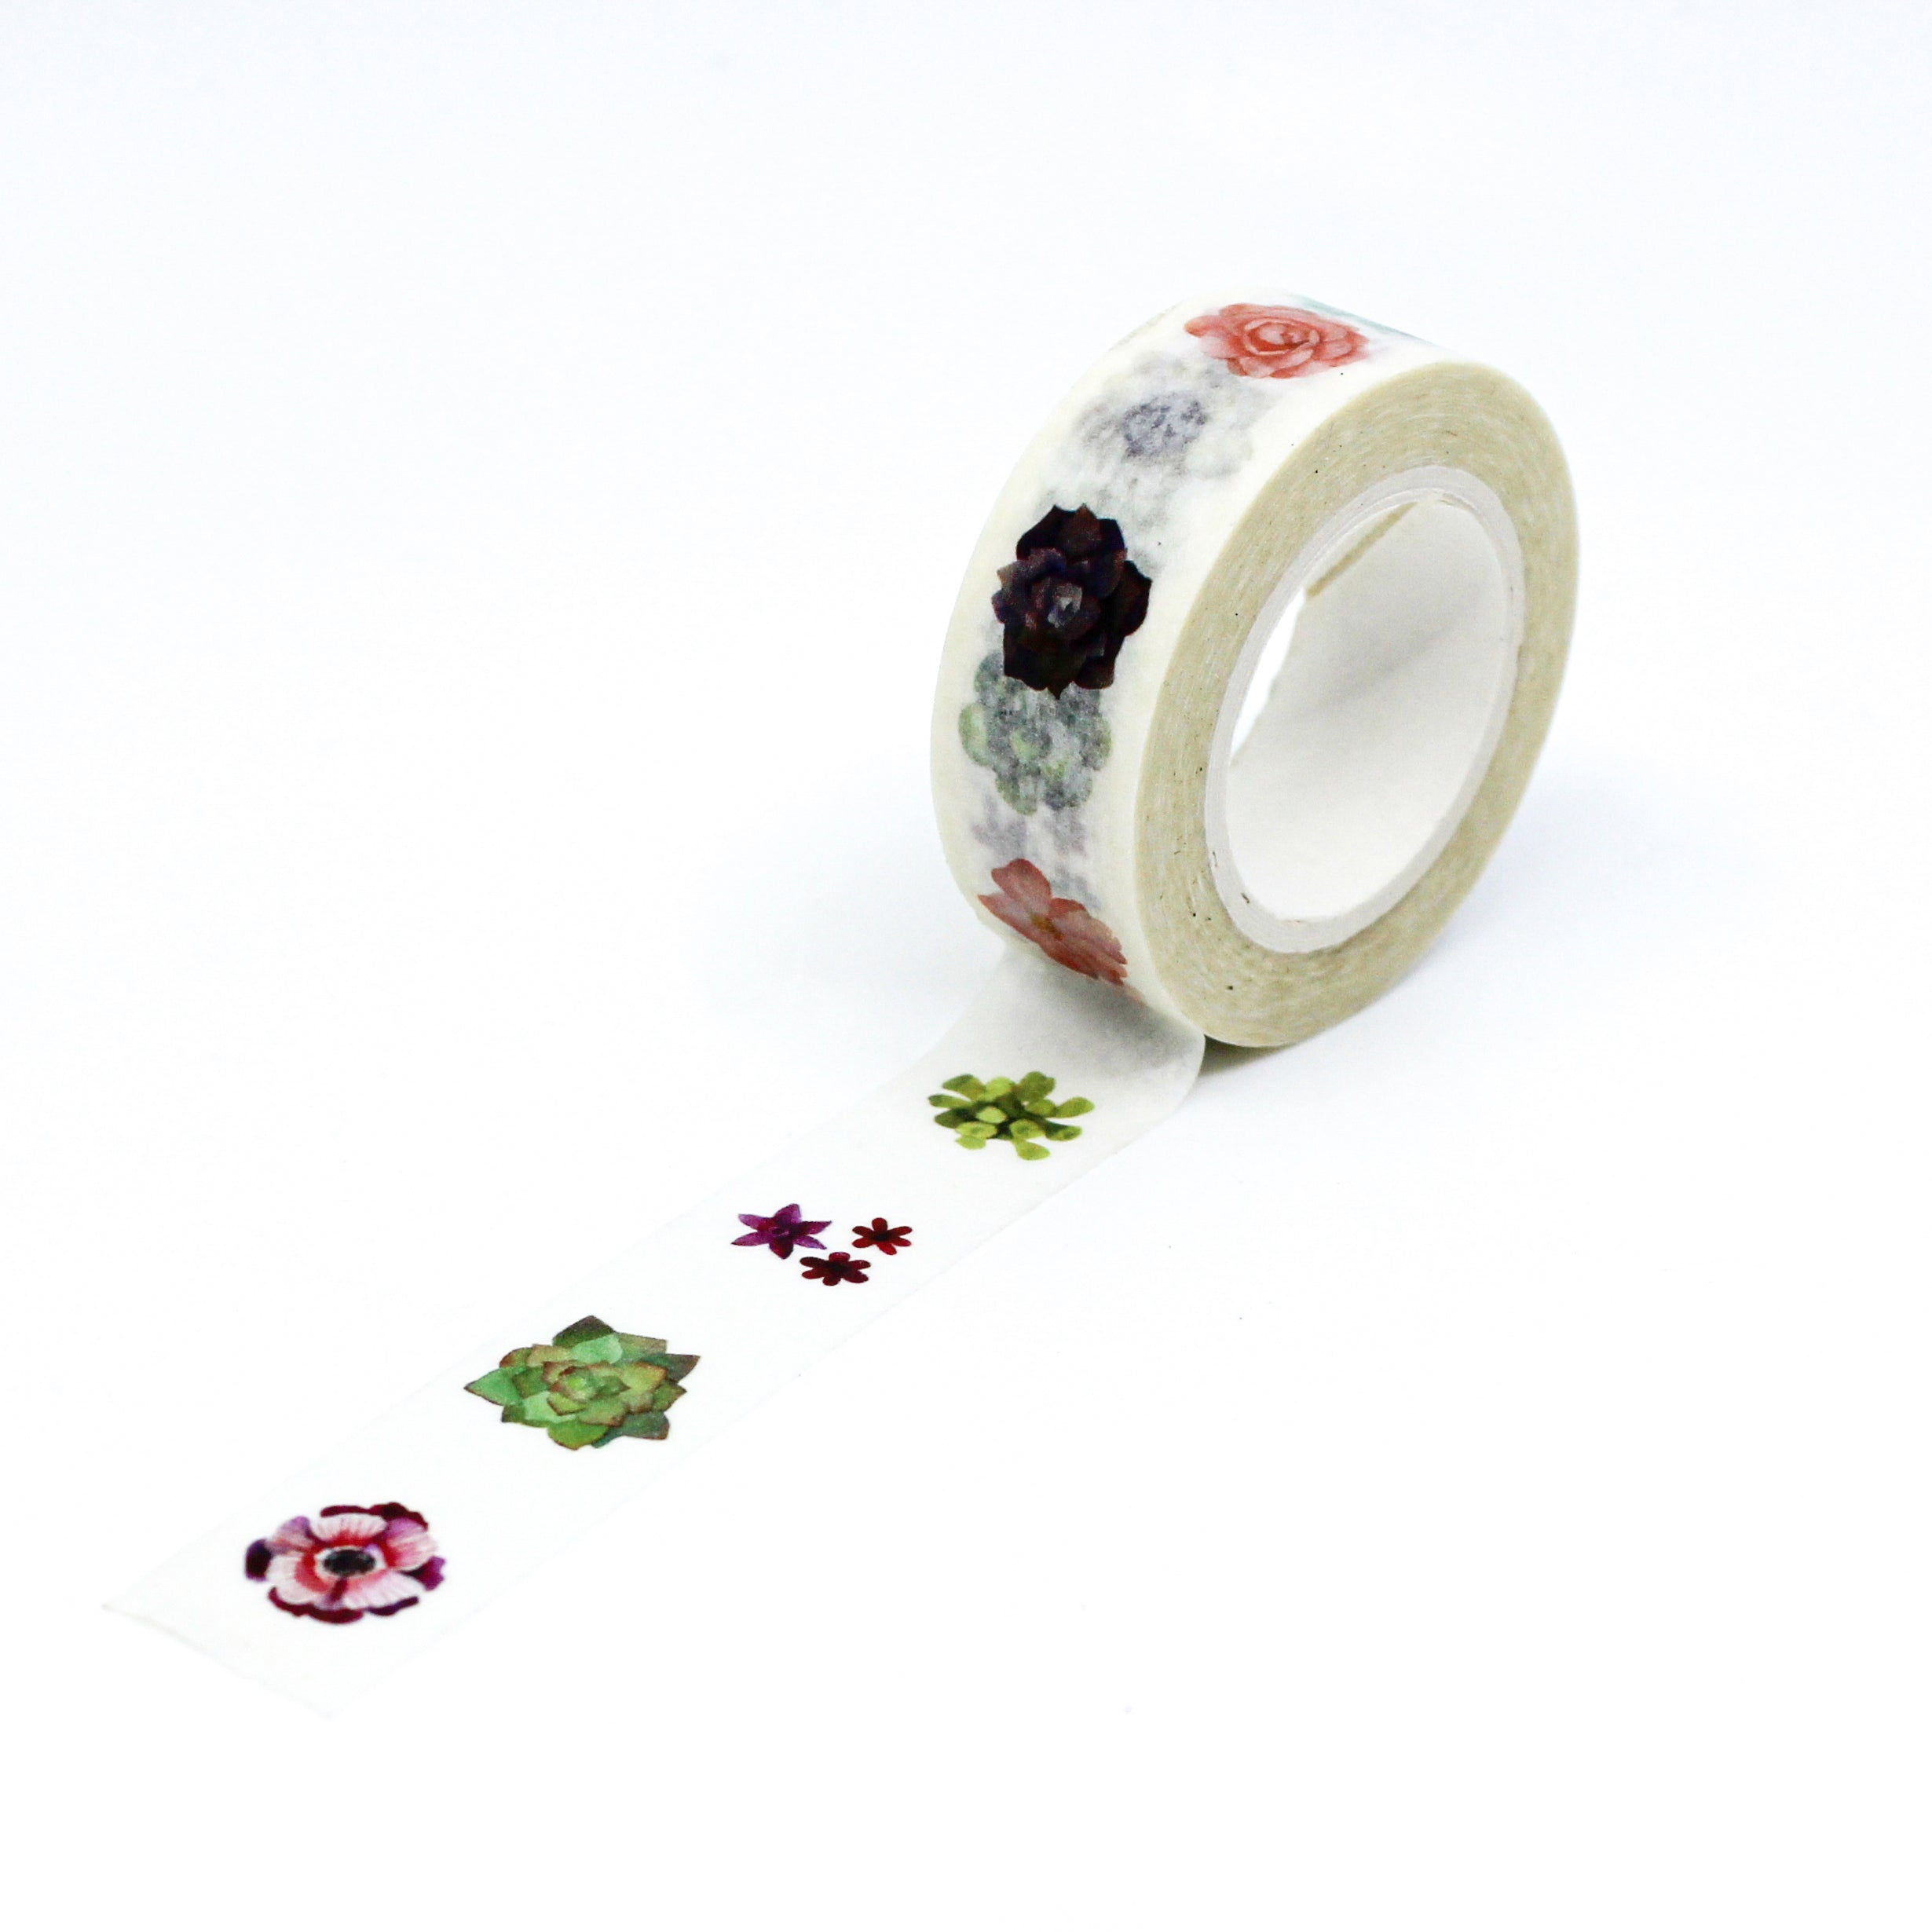 This is a full pattern repeat view of single succulent washi tape BBB Supplies Craft Shop